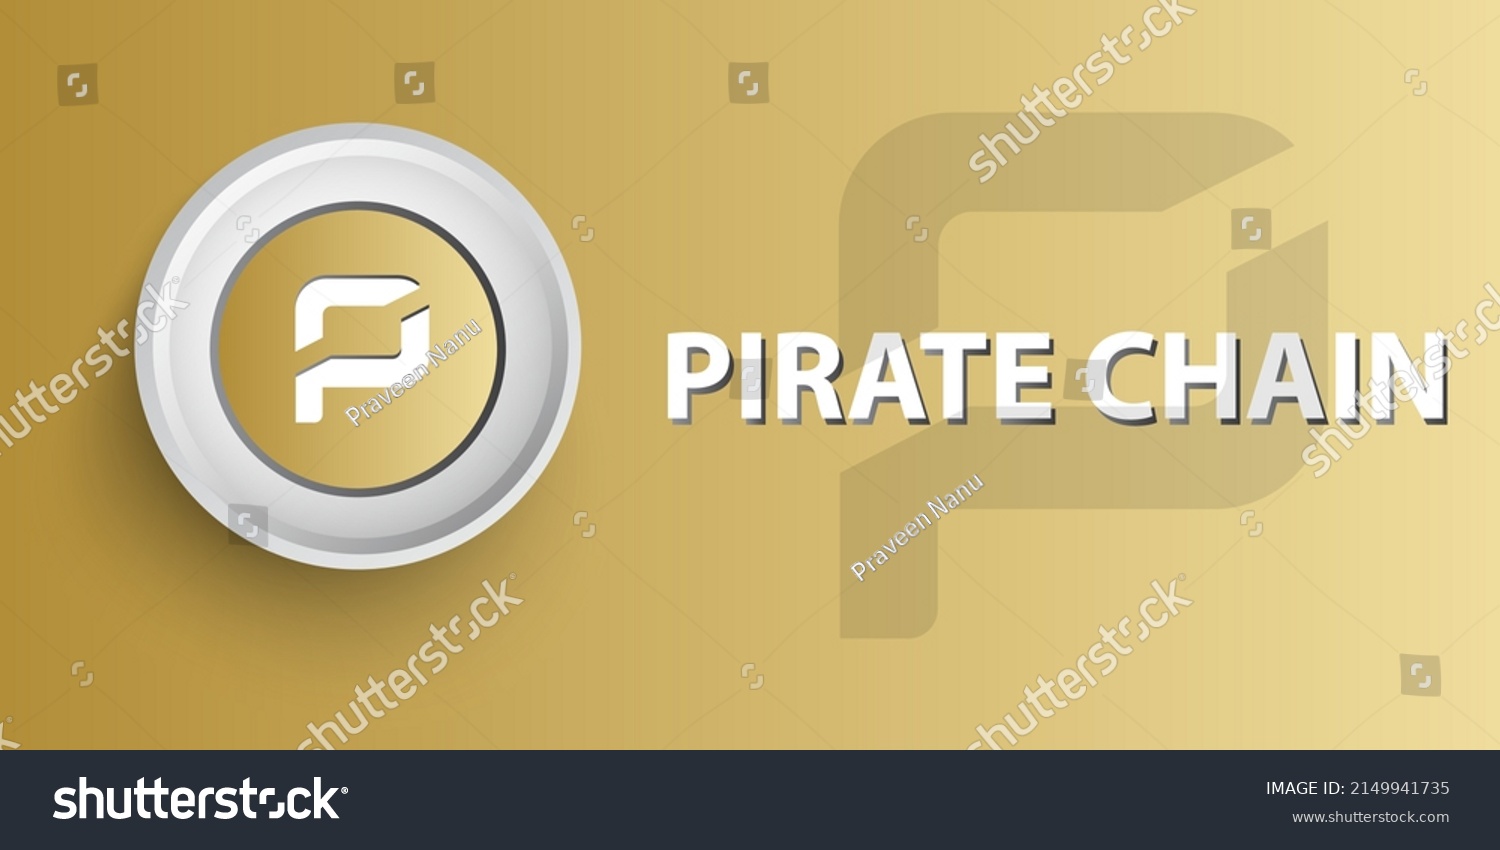 pirate arrr cryptocurrency